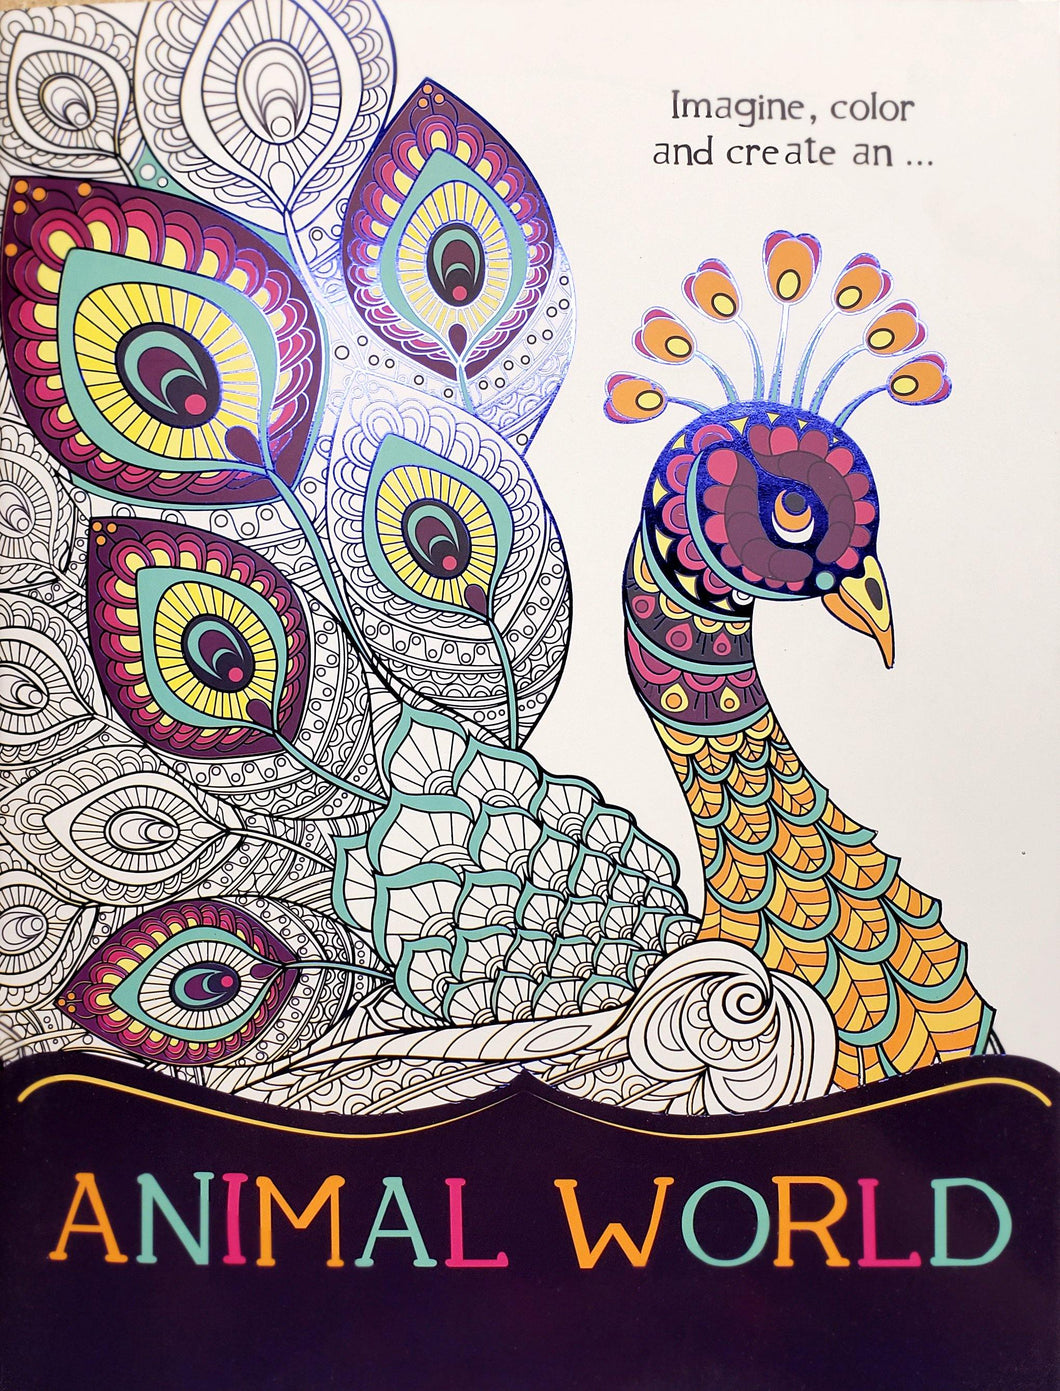 Animal Themed Adult Coloring Books for Stress Relief - MirthSlinger